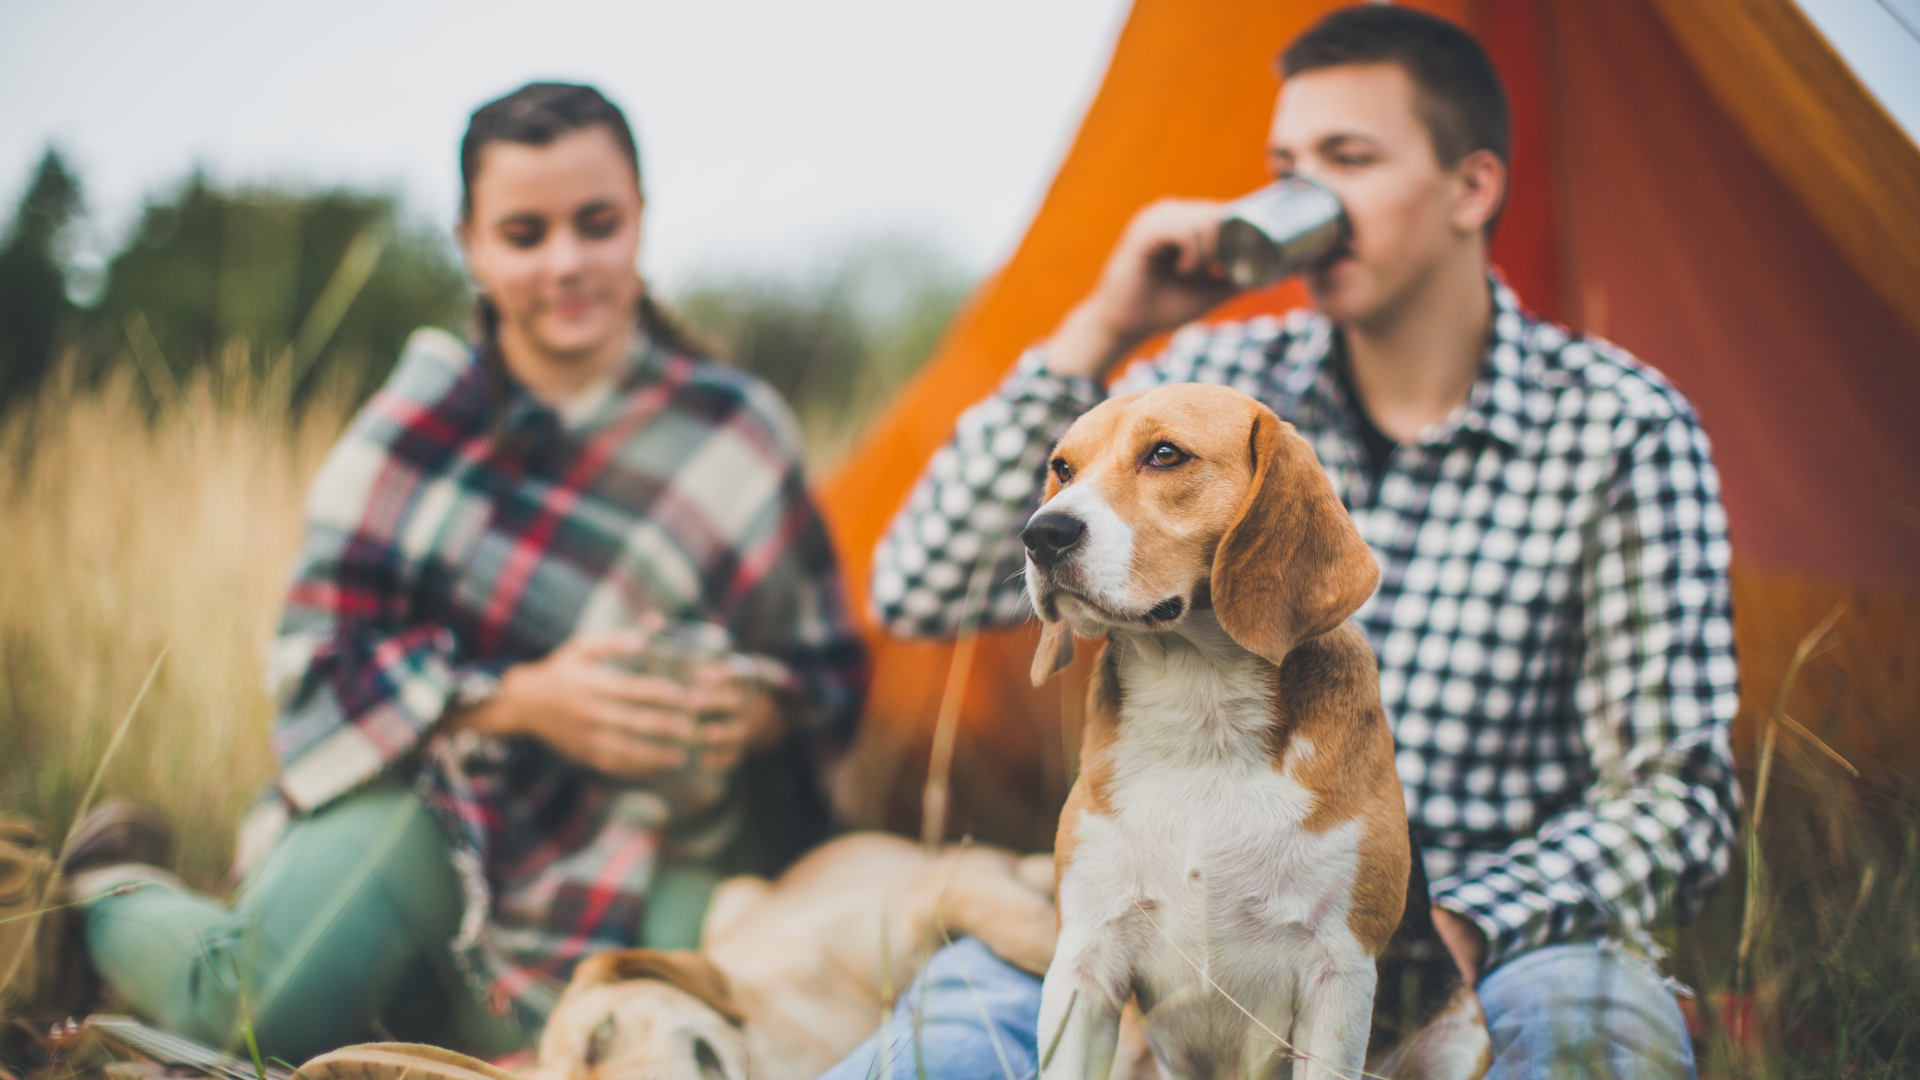 Camping with dogs: tips and tricks for canine overnights | Advnture